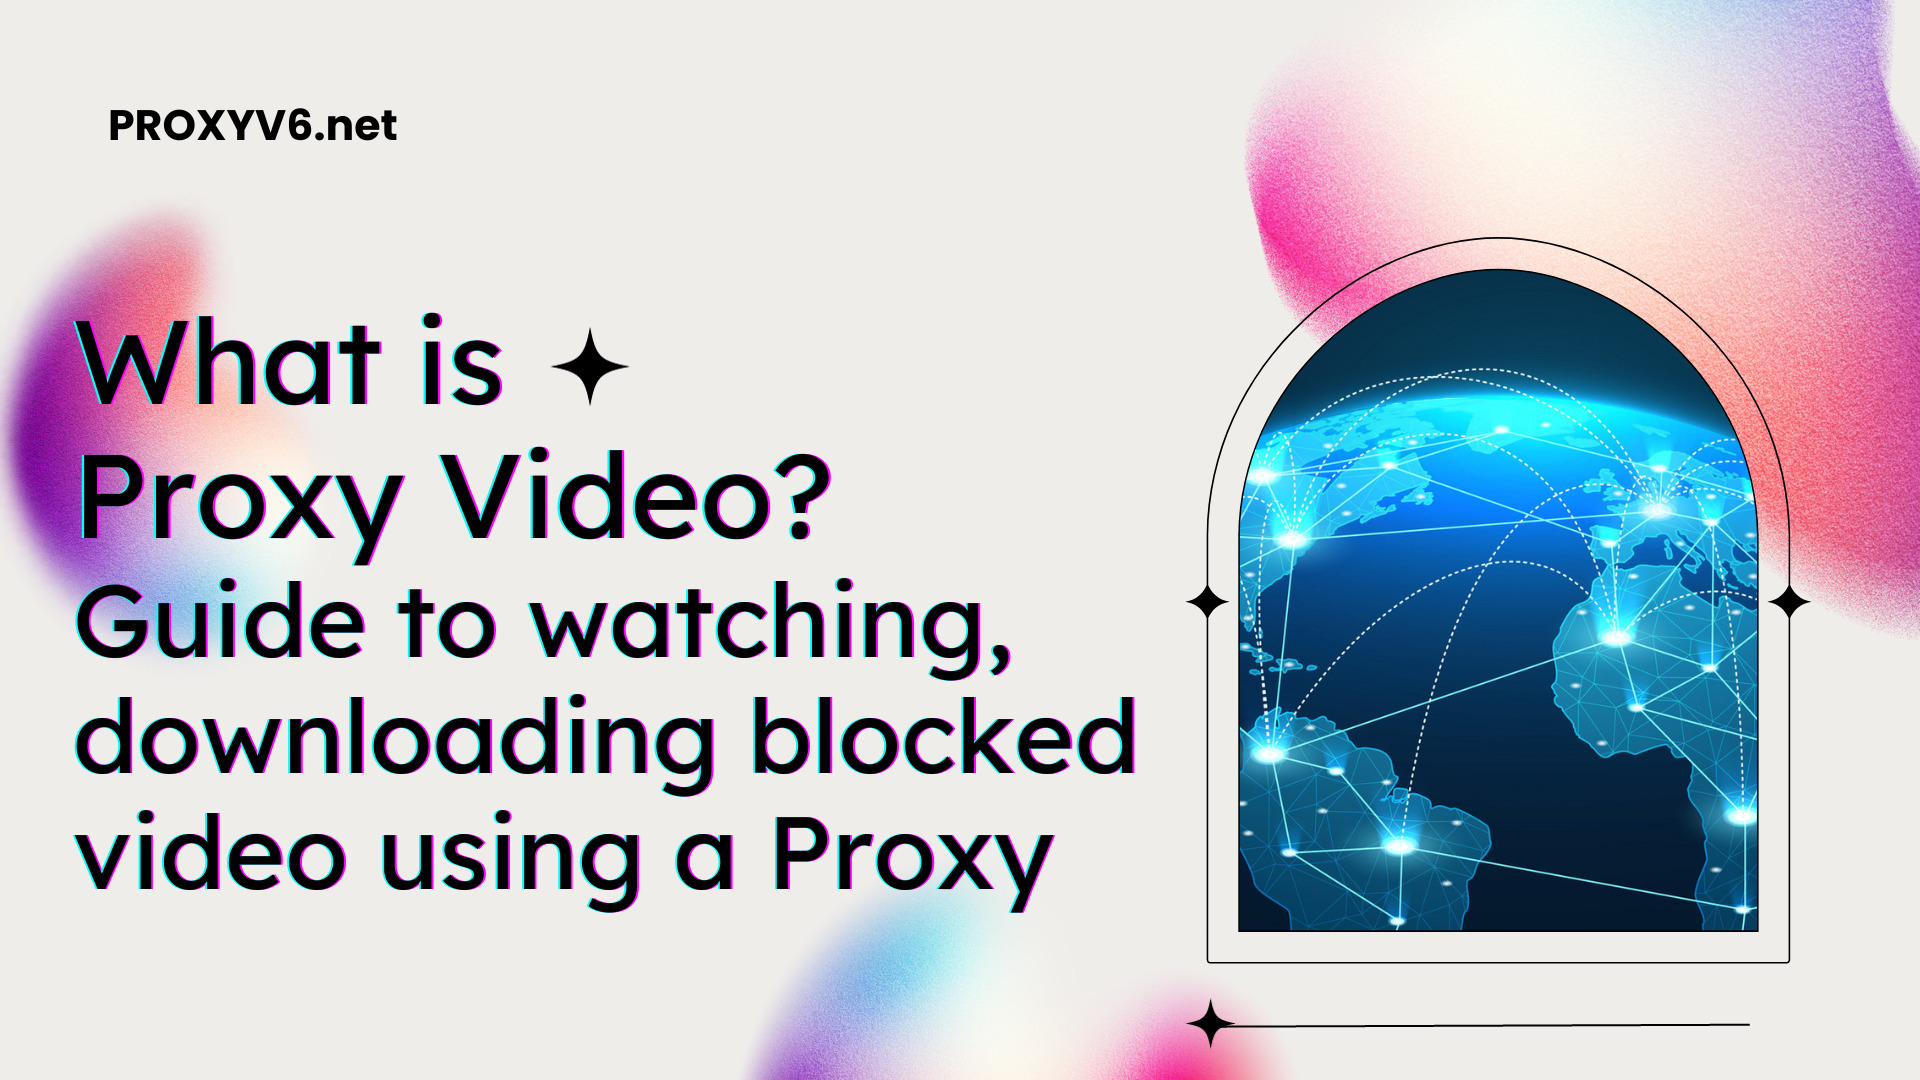 What is Proxy Video? Guide to watching, downloading blocked video using a Proxy